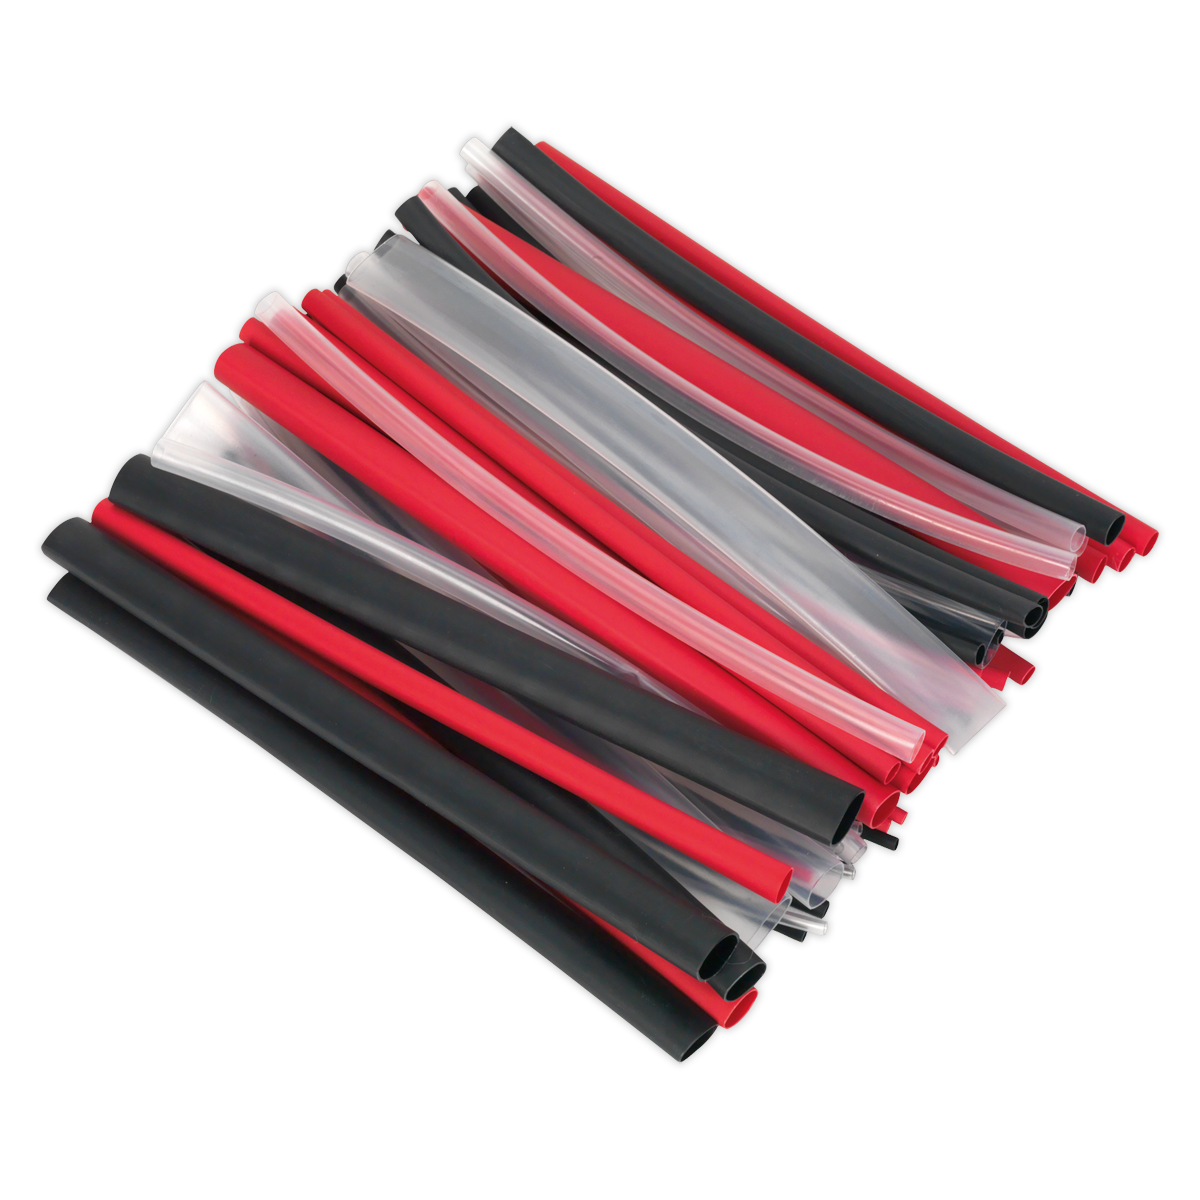 Heat Shrink Tubing Assortment 72pc Mixed Colours Adhesive Lined 200mm - HSTAL72MC - Farming Parts